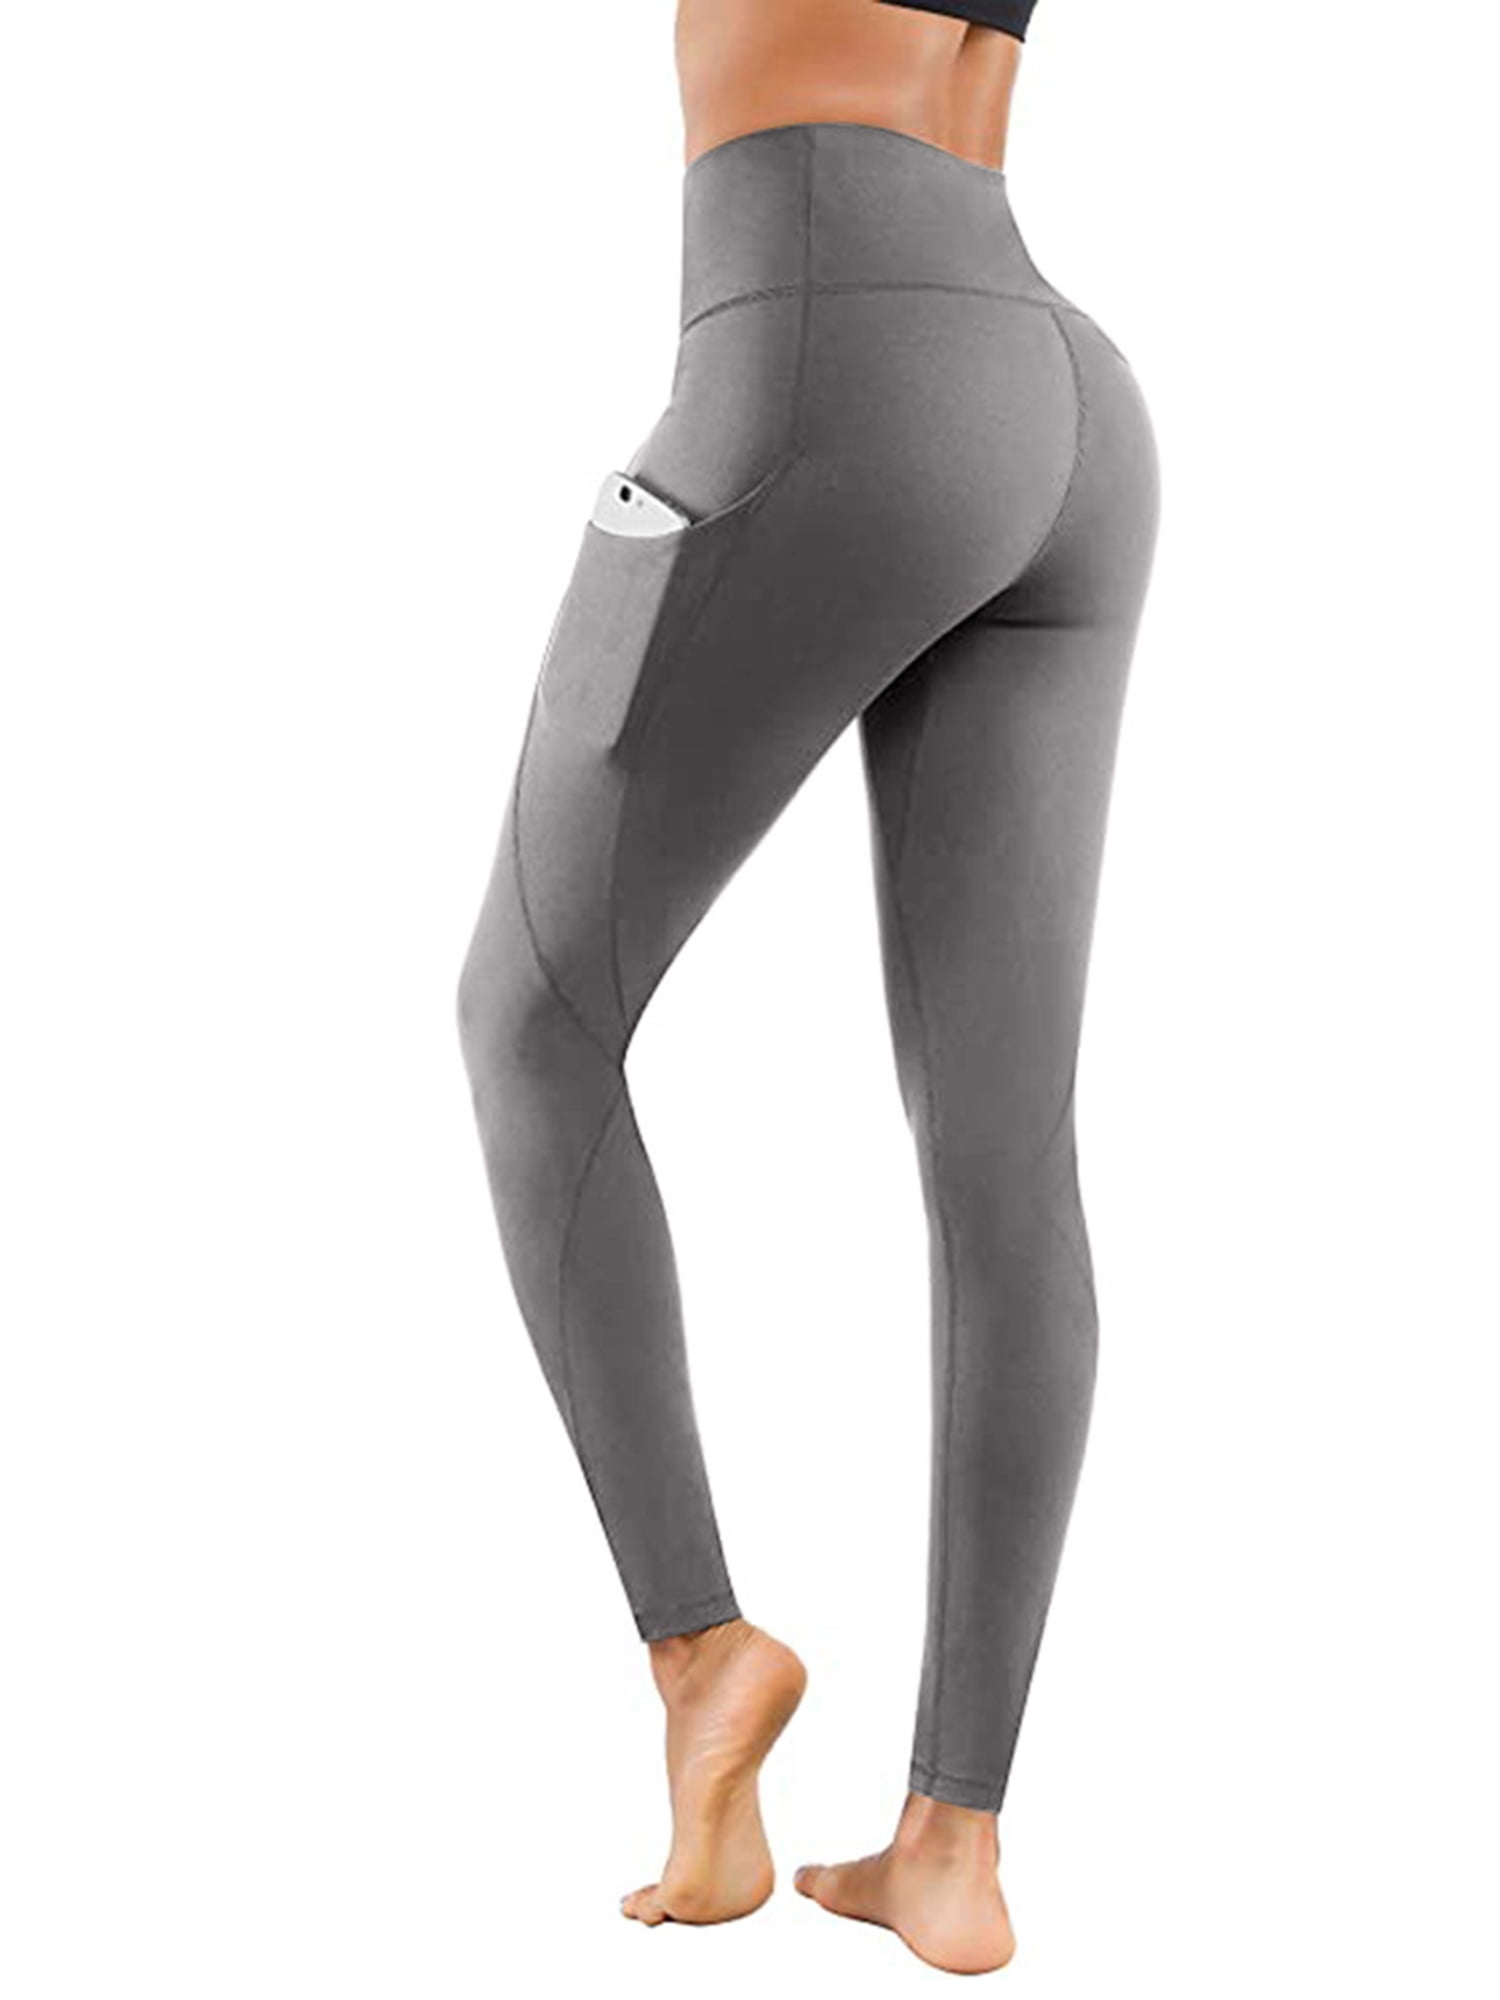 Sexy Dance Women's Yoga Pants with Pockets Moisture-Wicking High